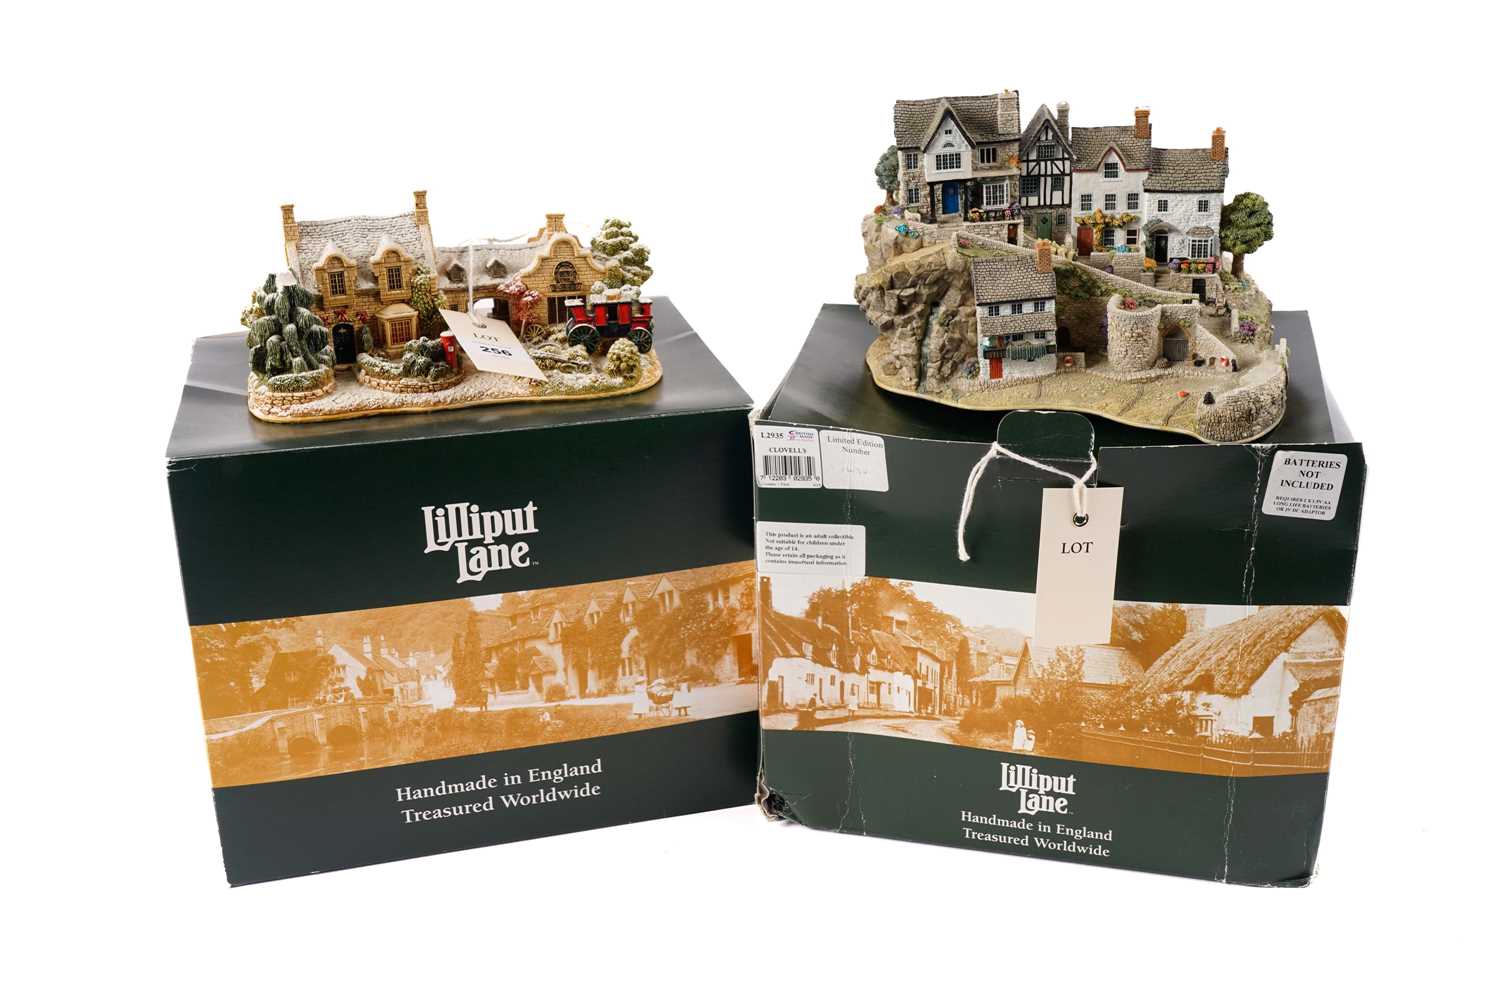 A limited-edition Lilliput Lane and another cottage